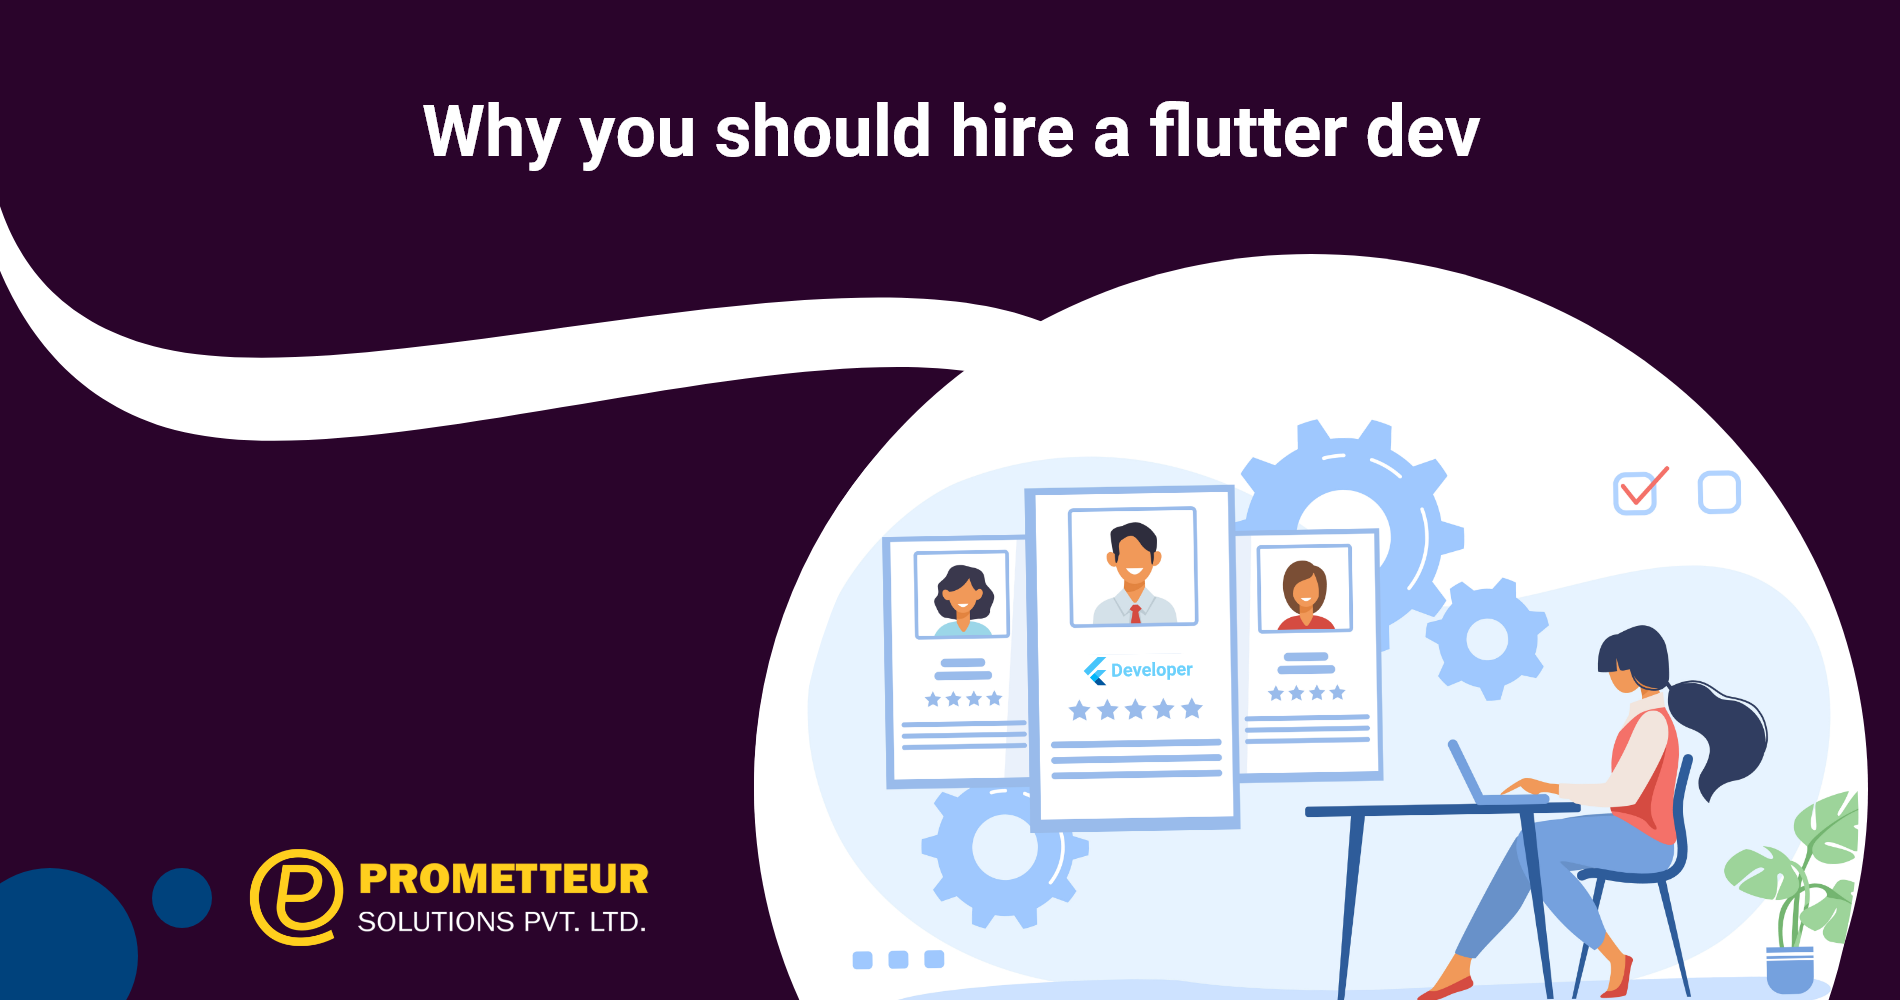 Why you should hire a flutter dev